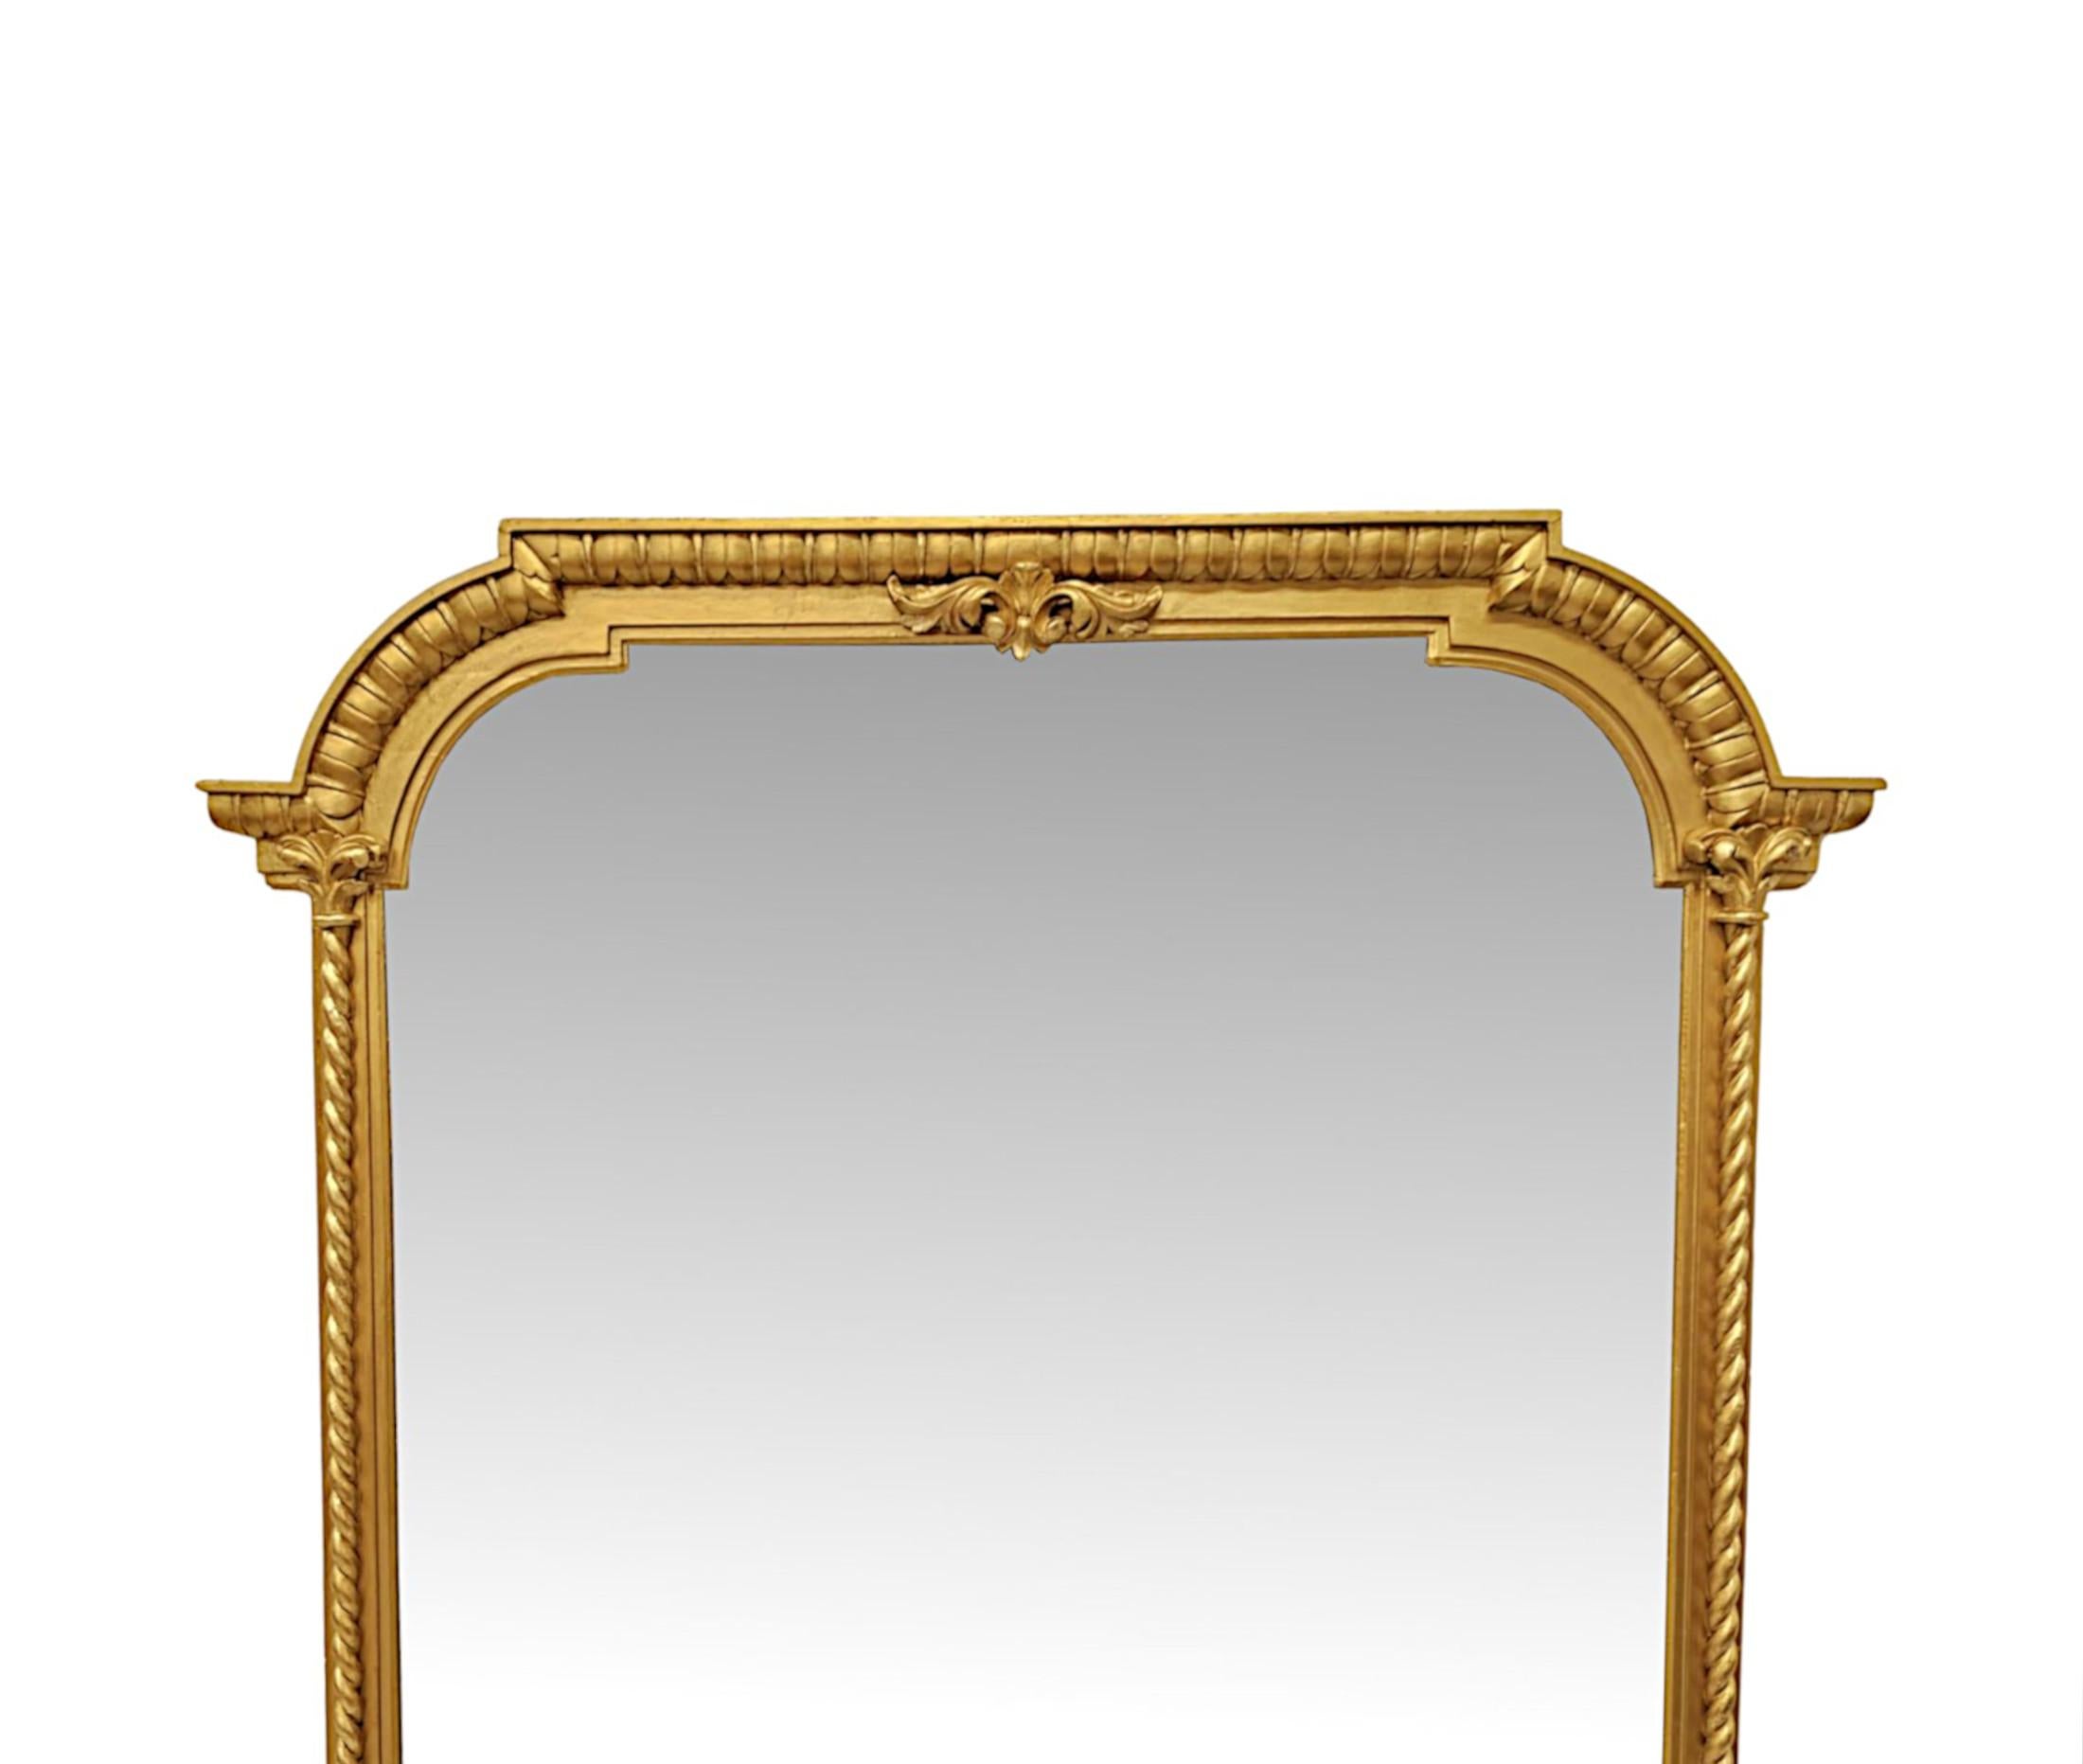 A fabulous finely hand carved 19th Century giltwood mirror of grand proportions and exceptional quality.  The shaped mercury mirror glass plate of rectangular form is set within an intricately carved, panelled and moulded giltwood frame flanked with